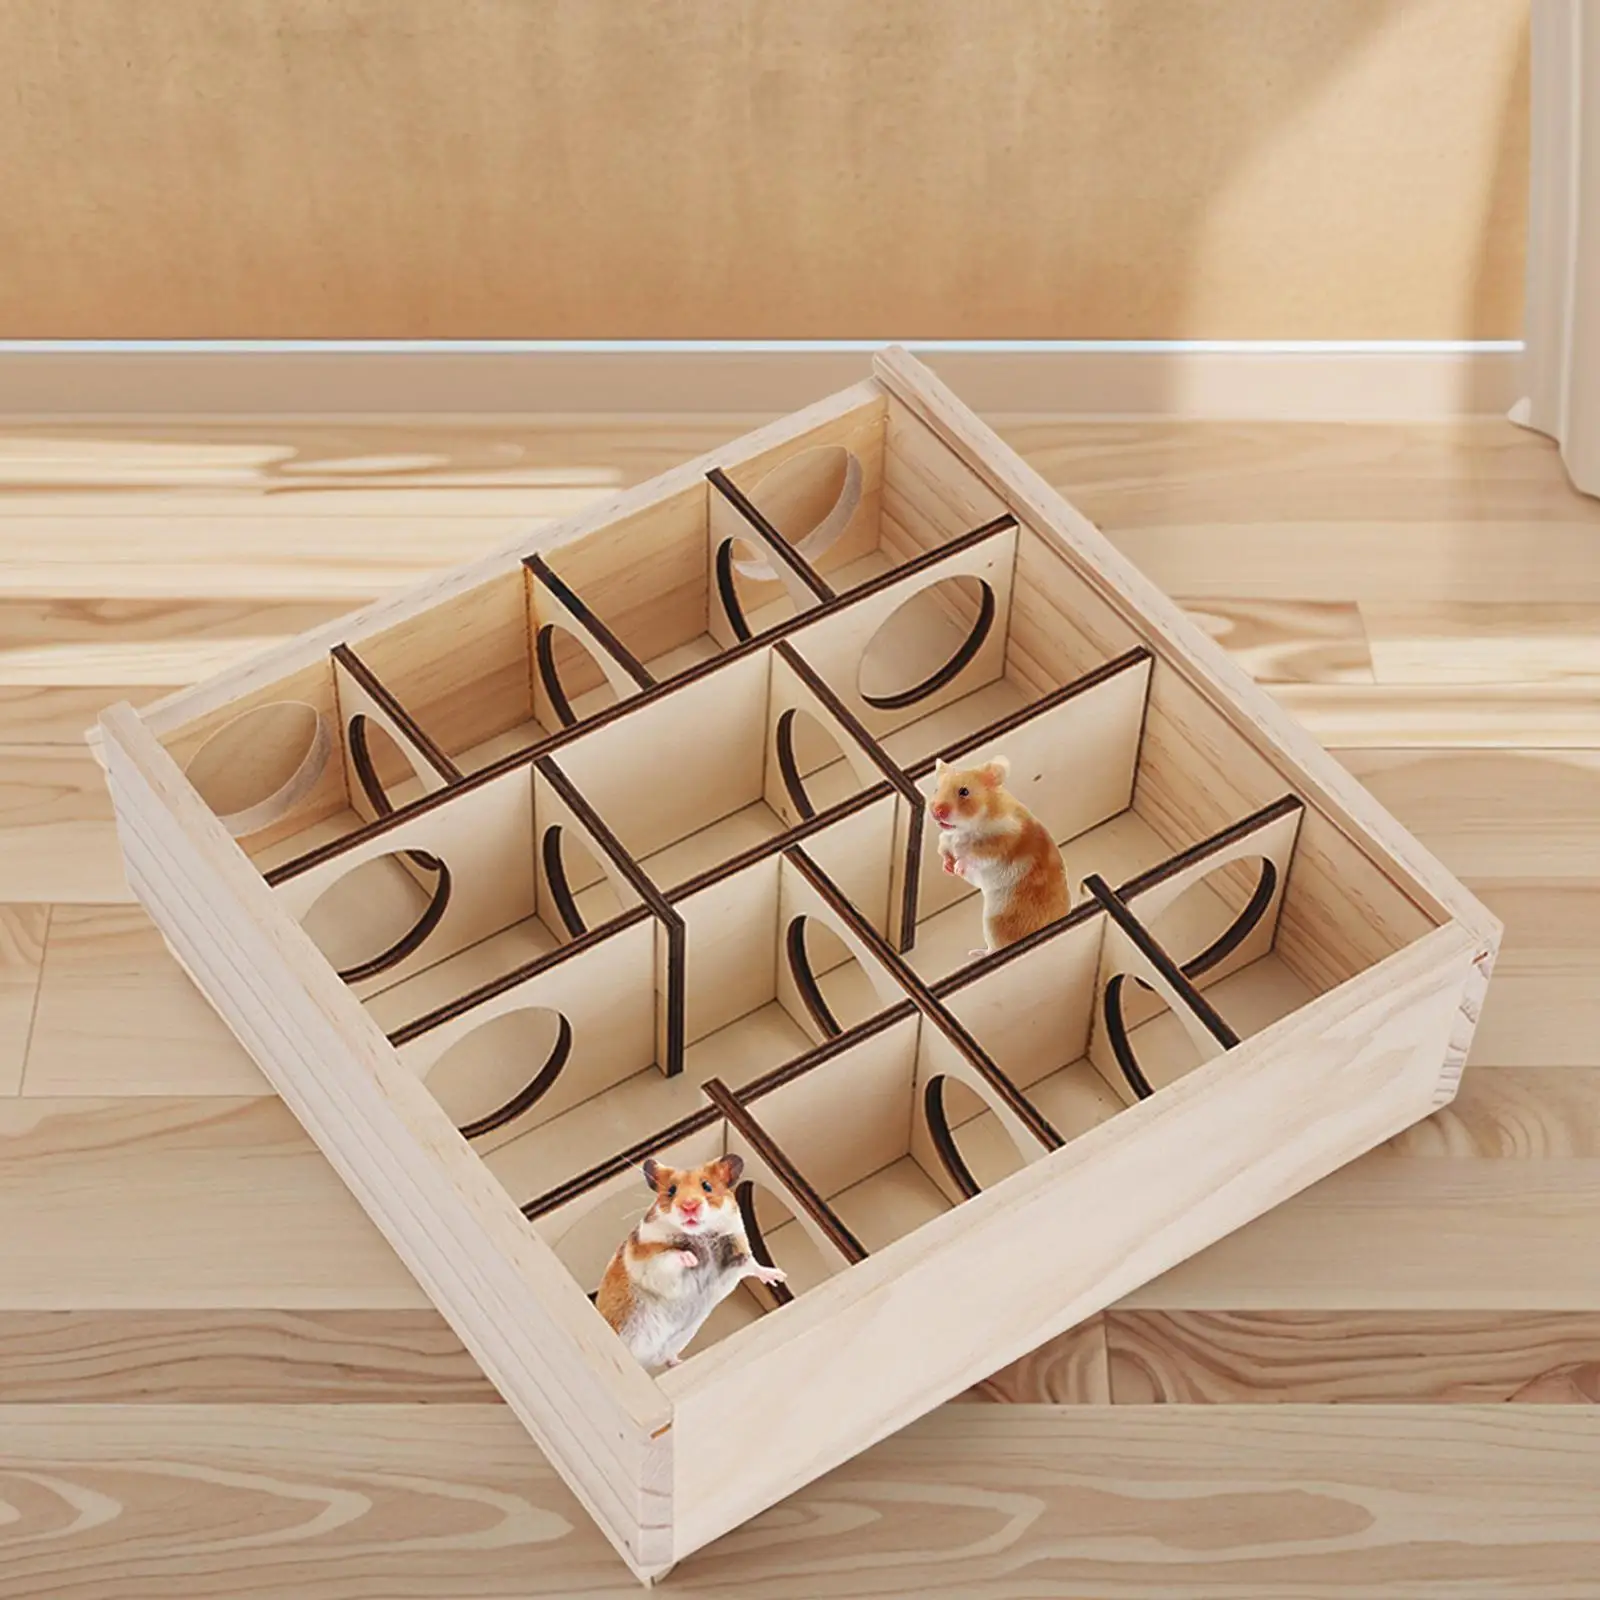 Pet Hamster House Small Animals Multi Chamber Wooden Maze for Dwarf Hamsters